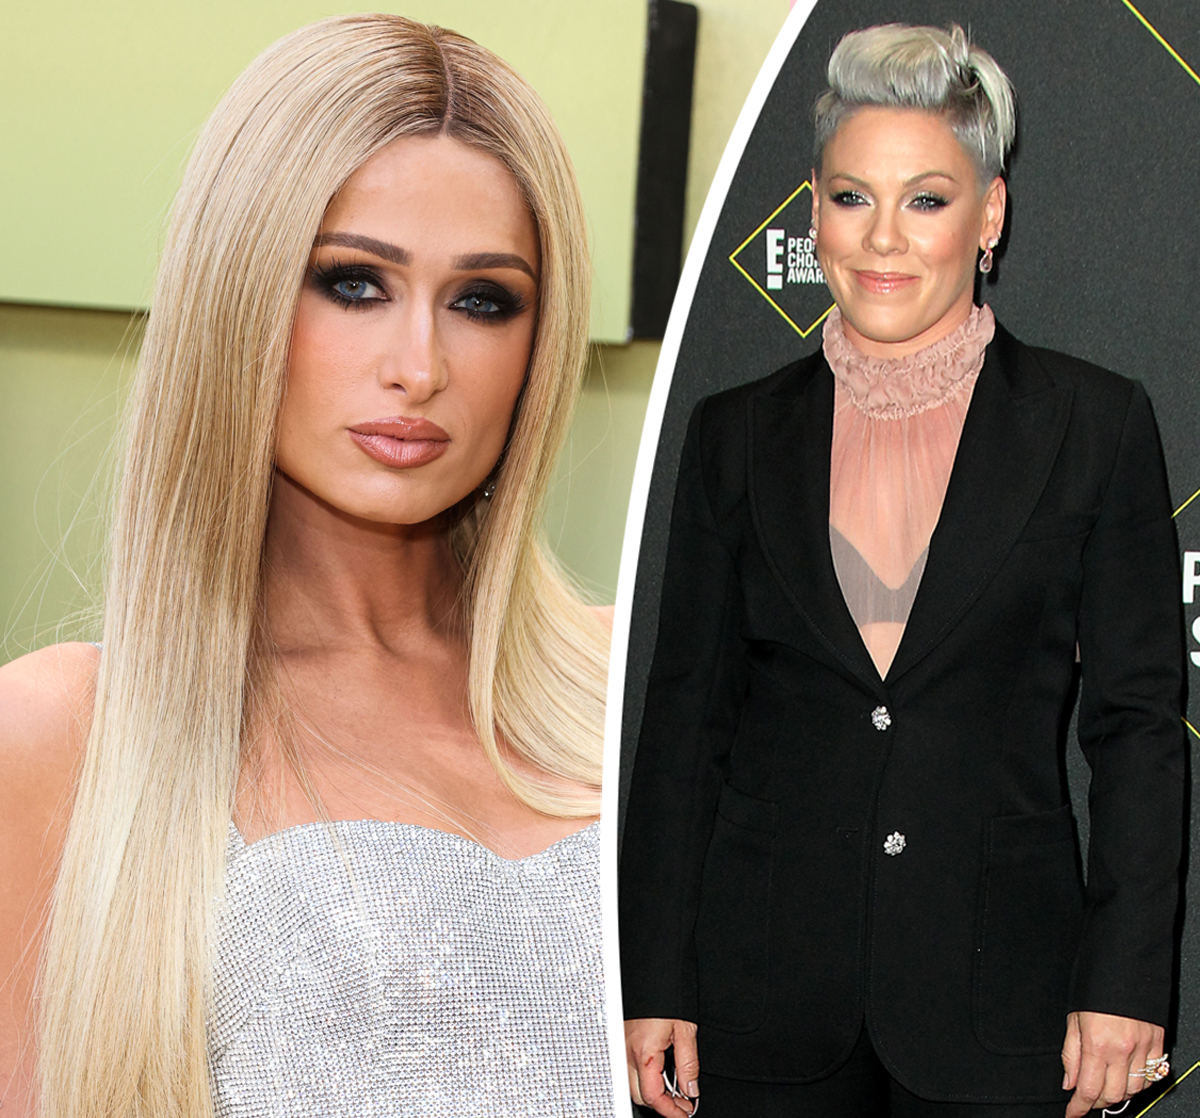 Paris Hilton Reveals The Moment She Felt Shamed By Pink Amid Sex Tape Fallout! pic